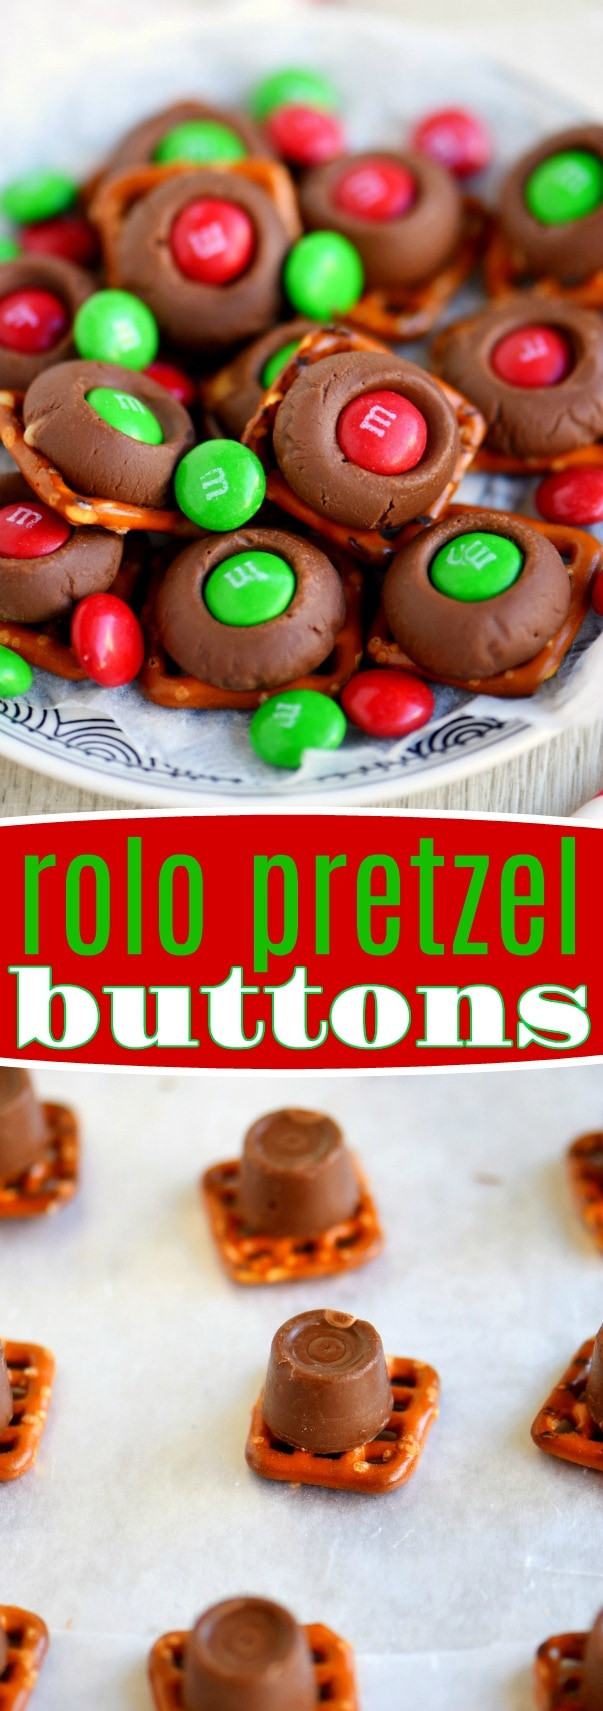 Rolo Christmas Cookies
 Rolo Pretzel Buttons Just 3 Ingre nts Mom Timeout